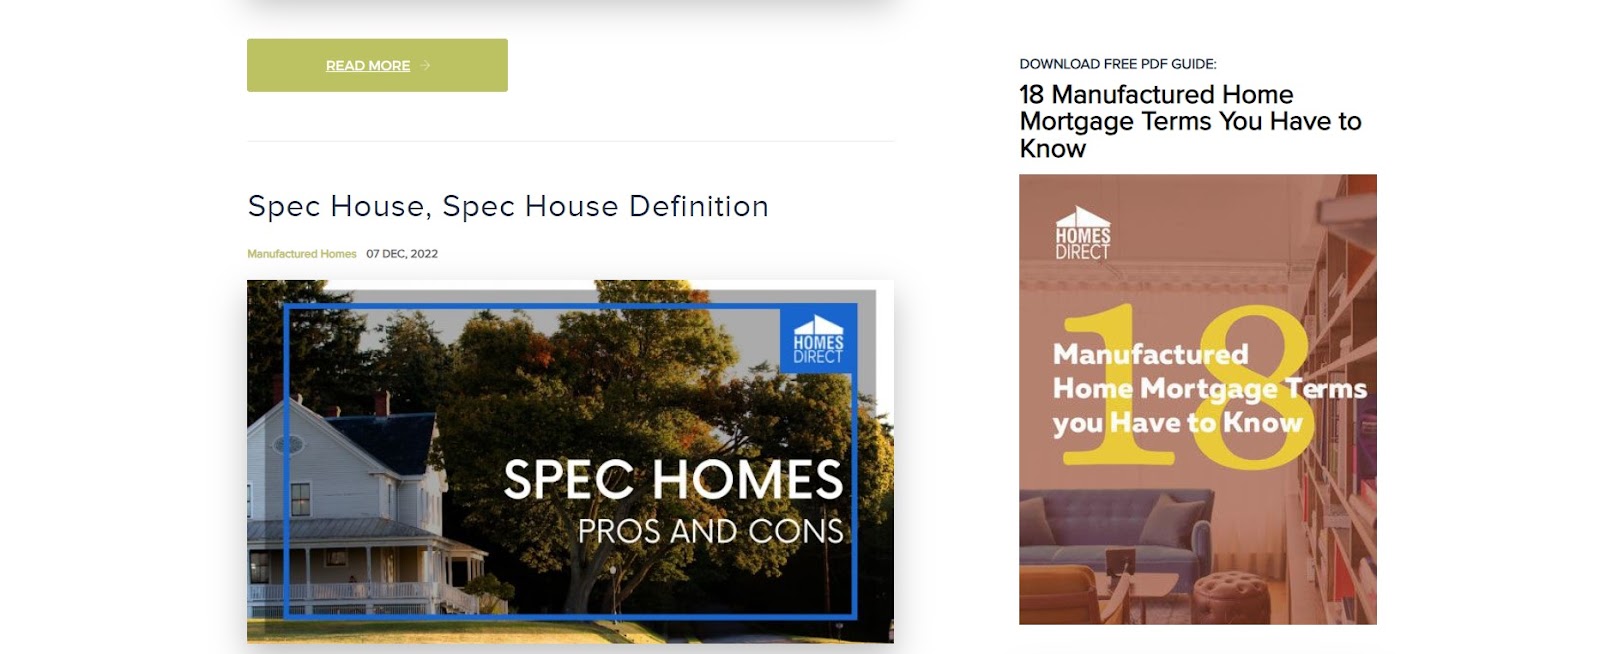 Homes Direct Guide